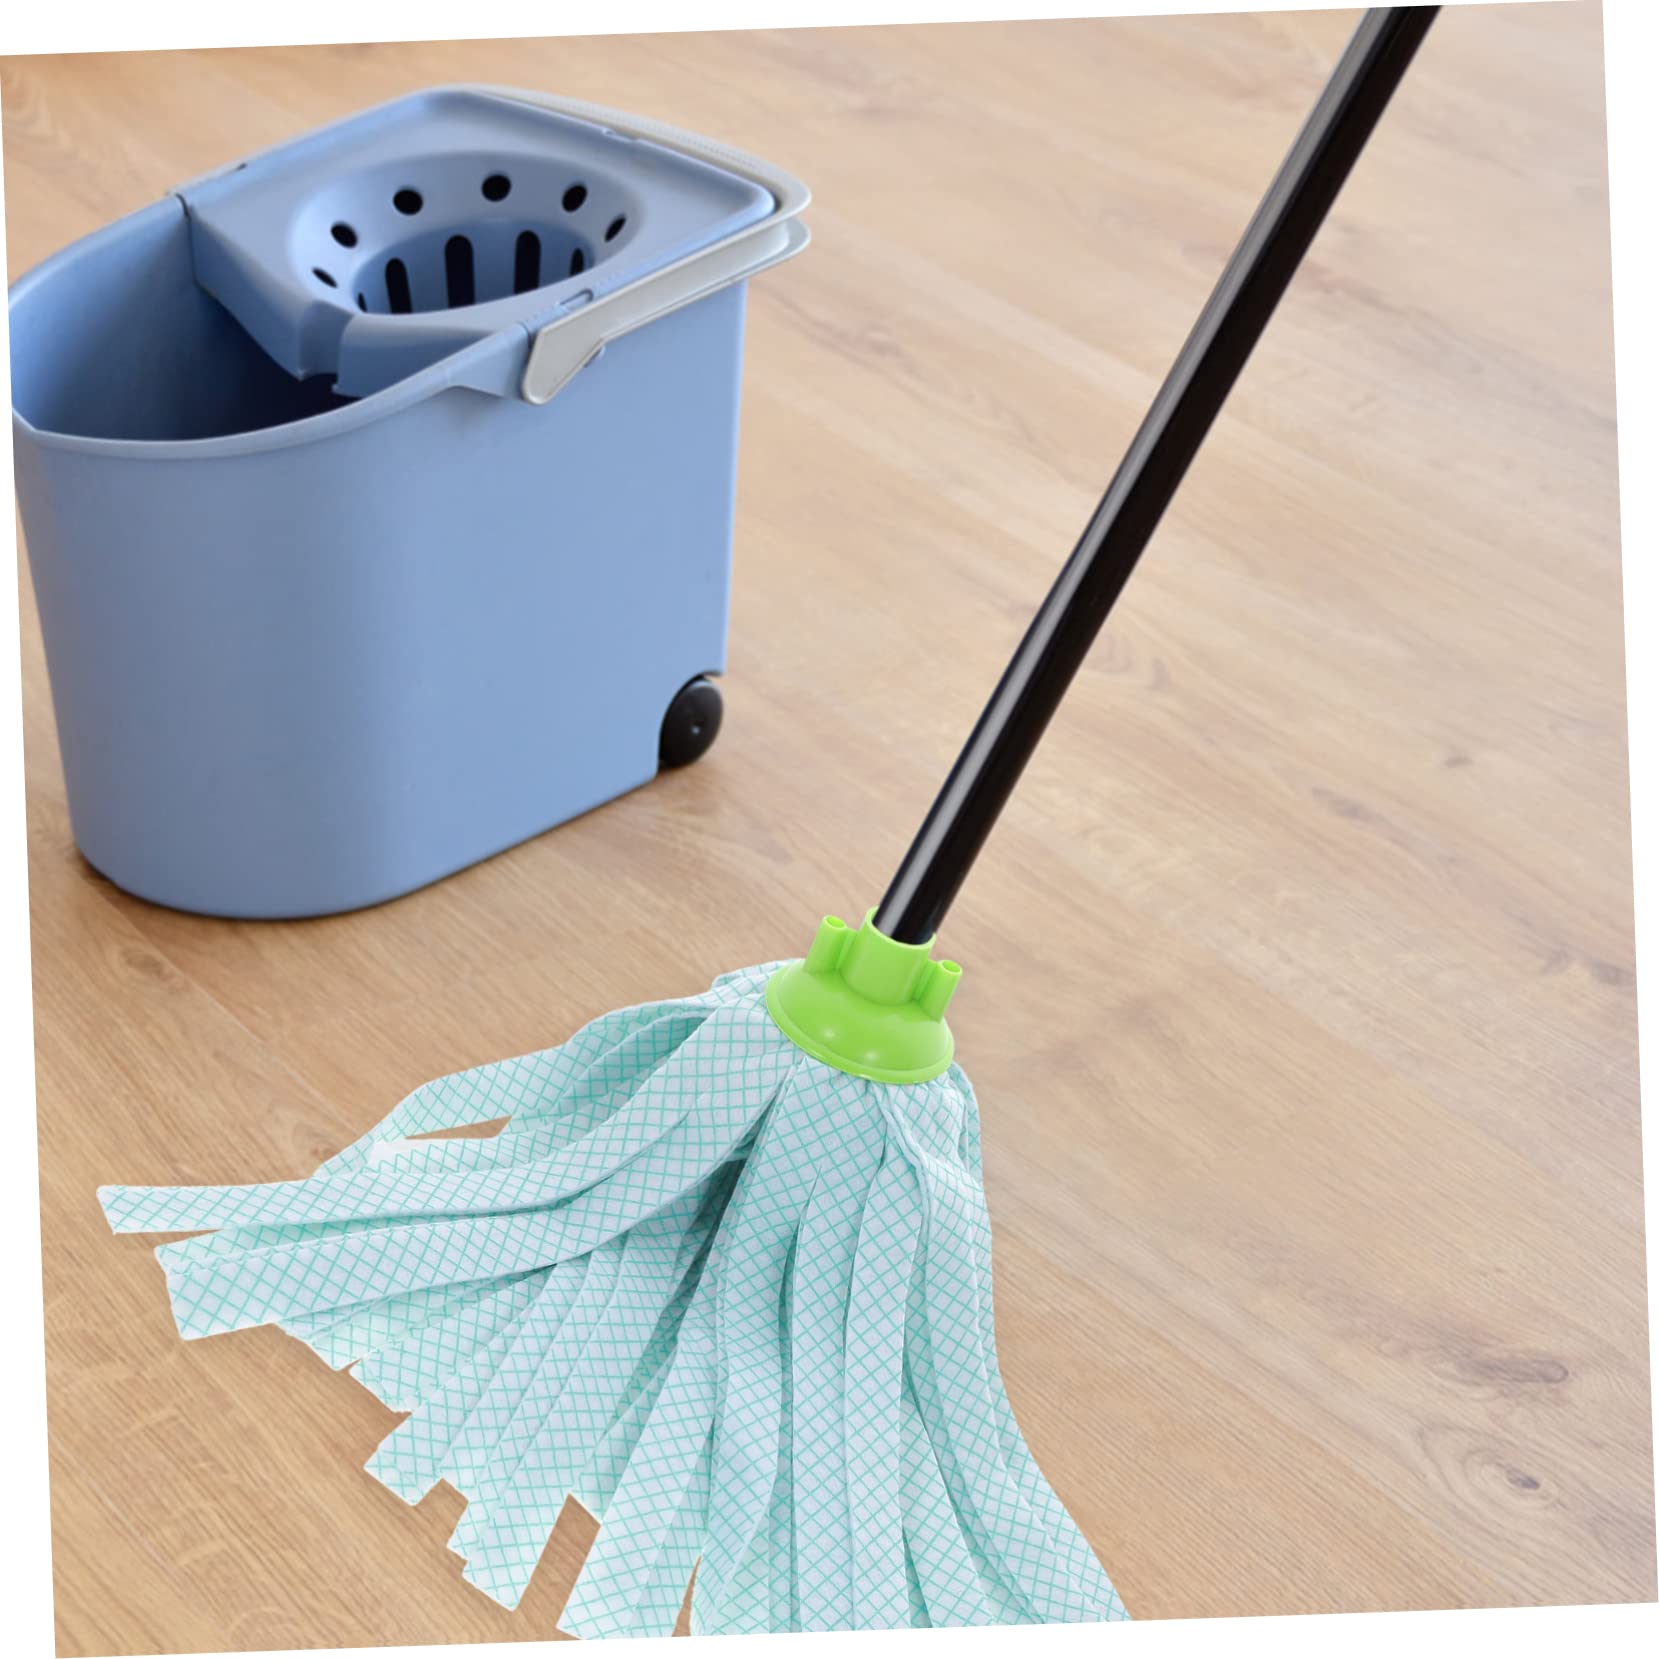 CIYODO 2pcs Mop Replacement Head Cotton Floor Cleaning Easy Cleaning Mop Replace Microfiber Cloth Mop Refill Wet Mop Head Refill Floor Mop Heads Mop Refills Floor Mops Components Sponge